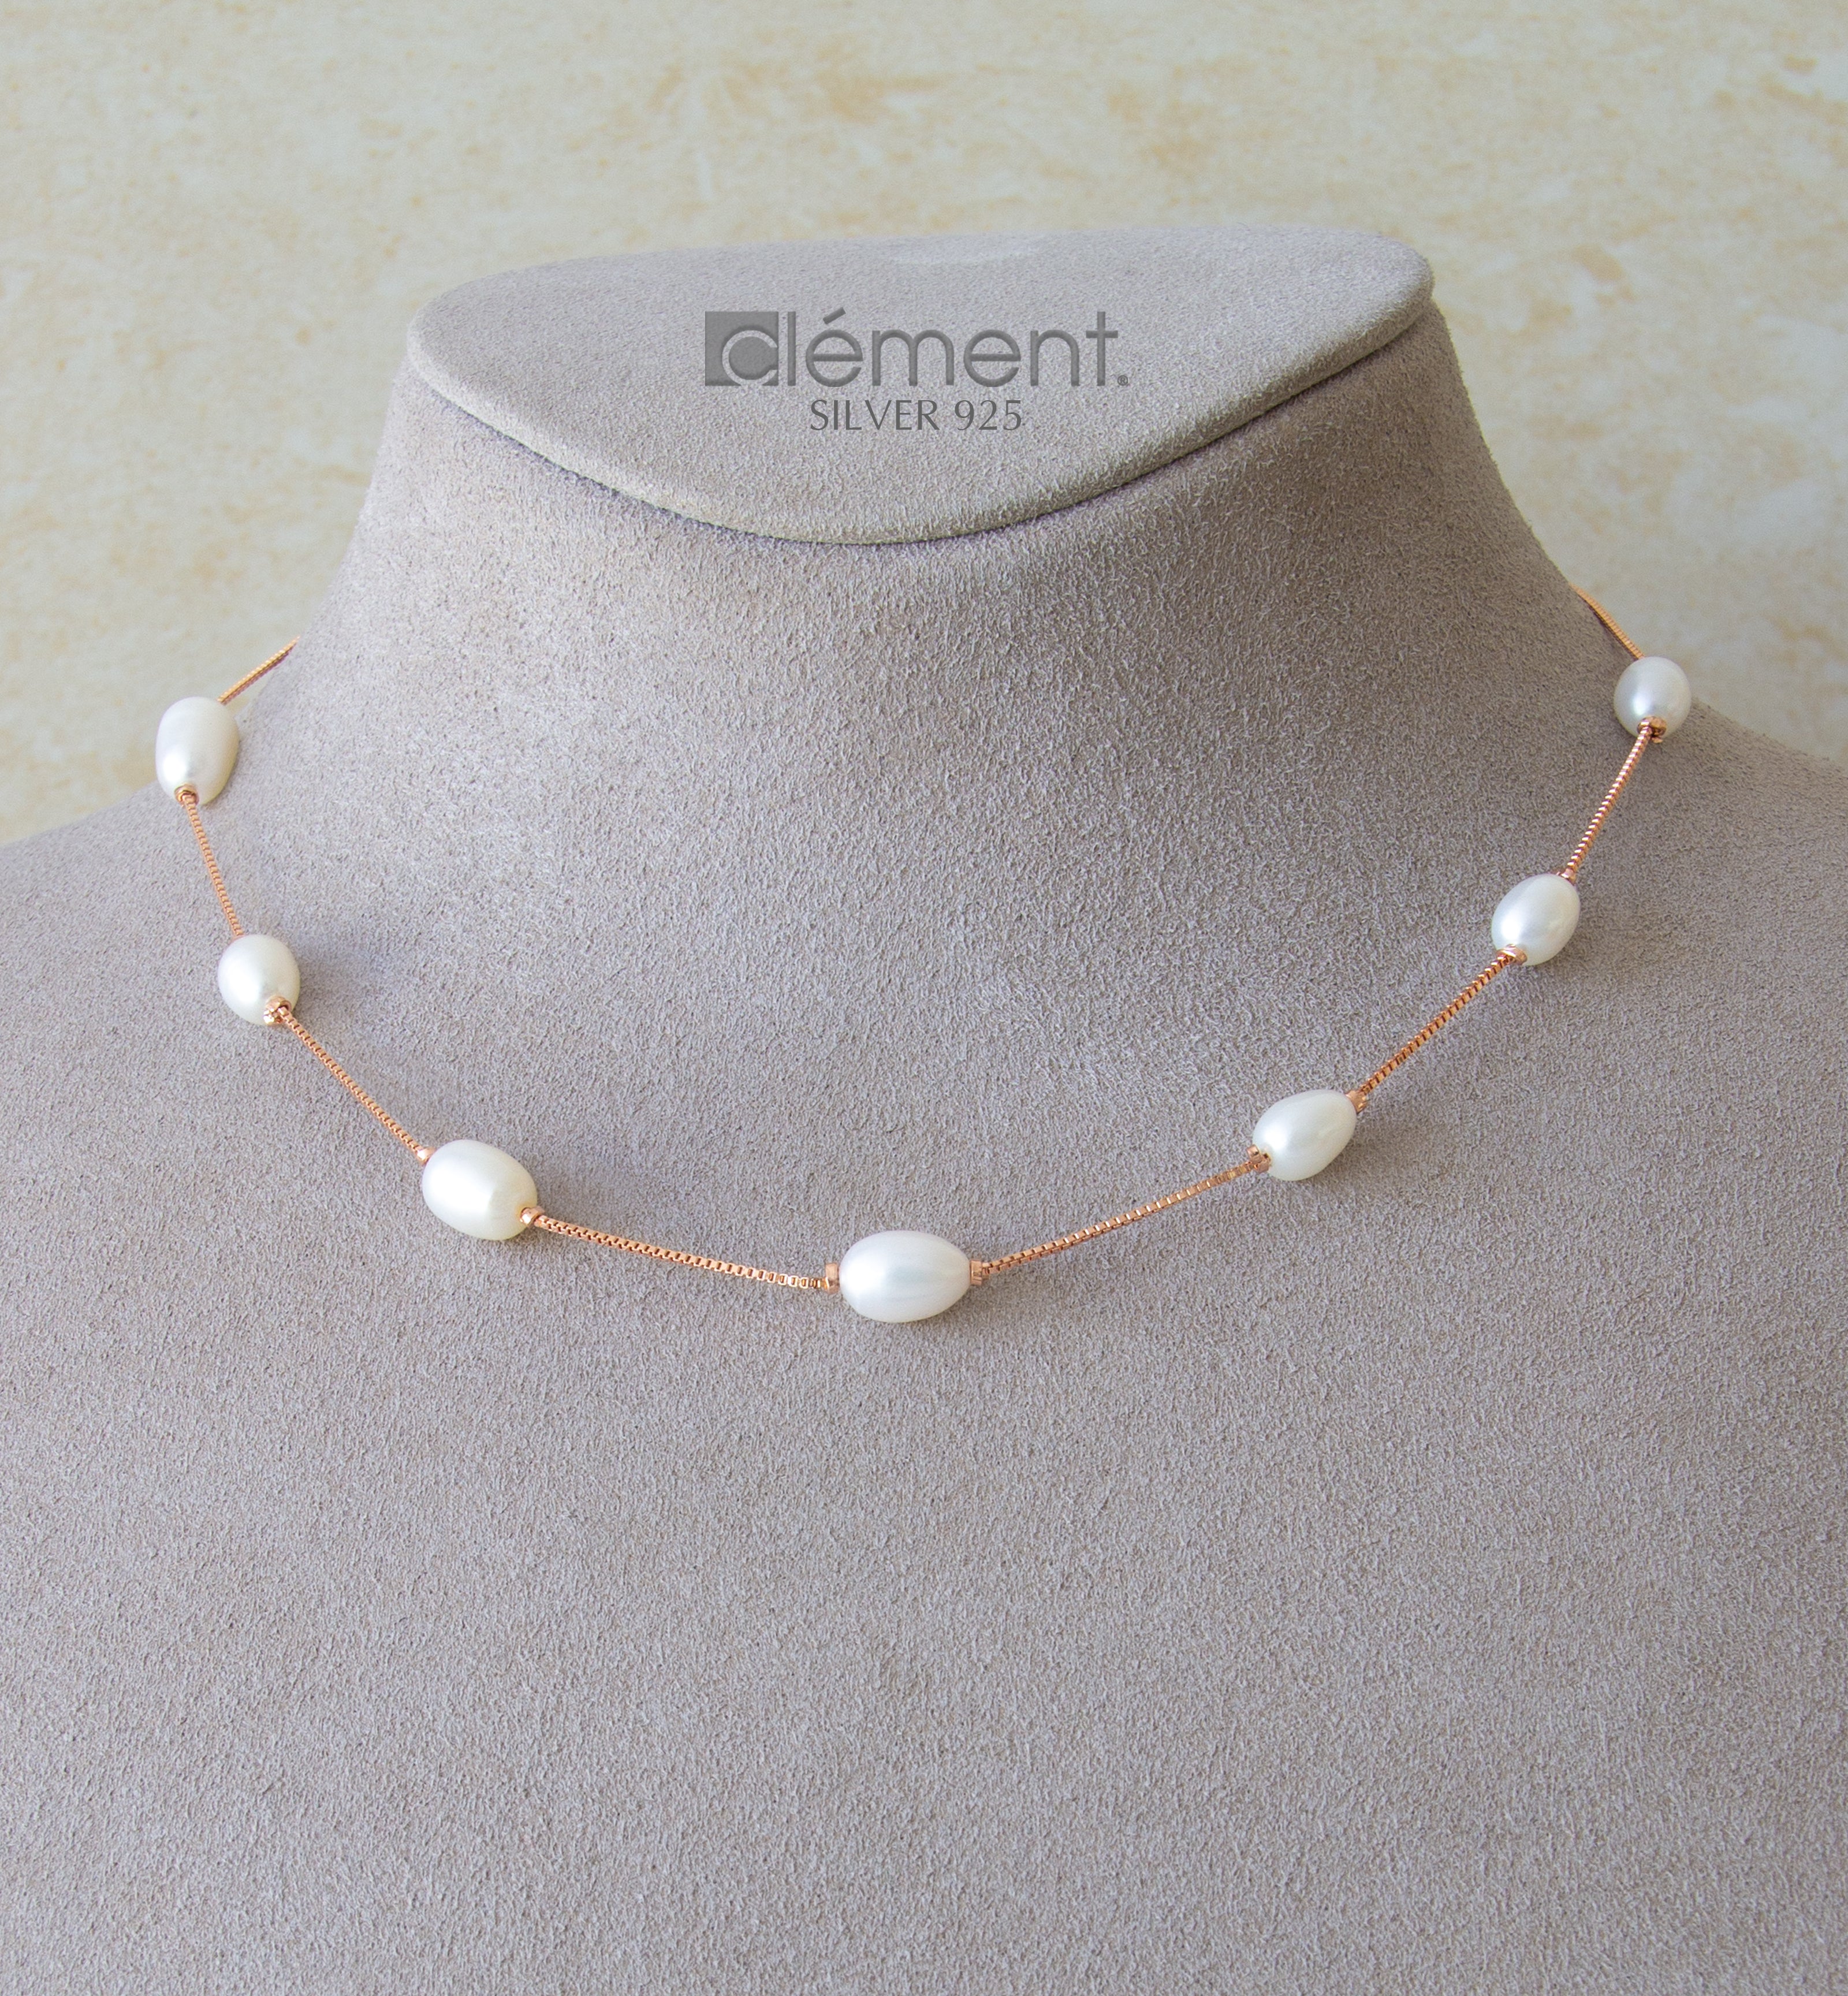 Silver 925 Rose Gold Plated Necklace with FW Cultured Pearls